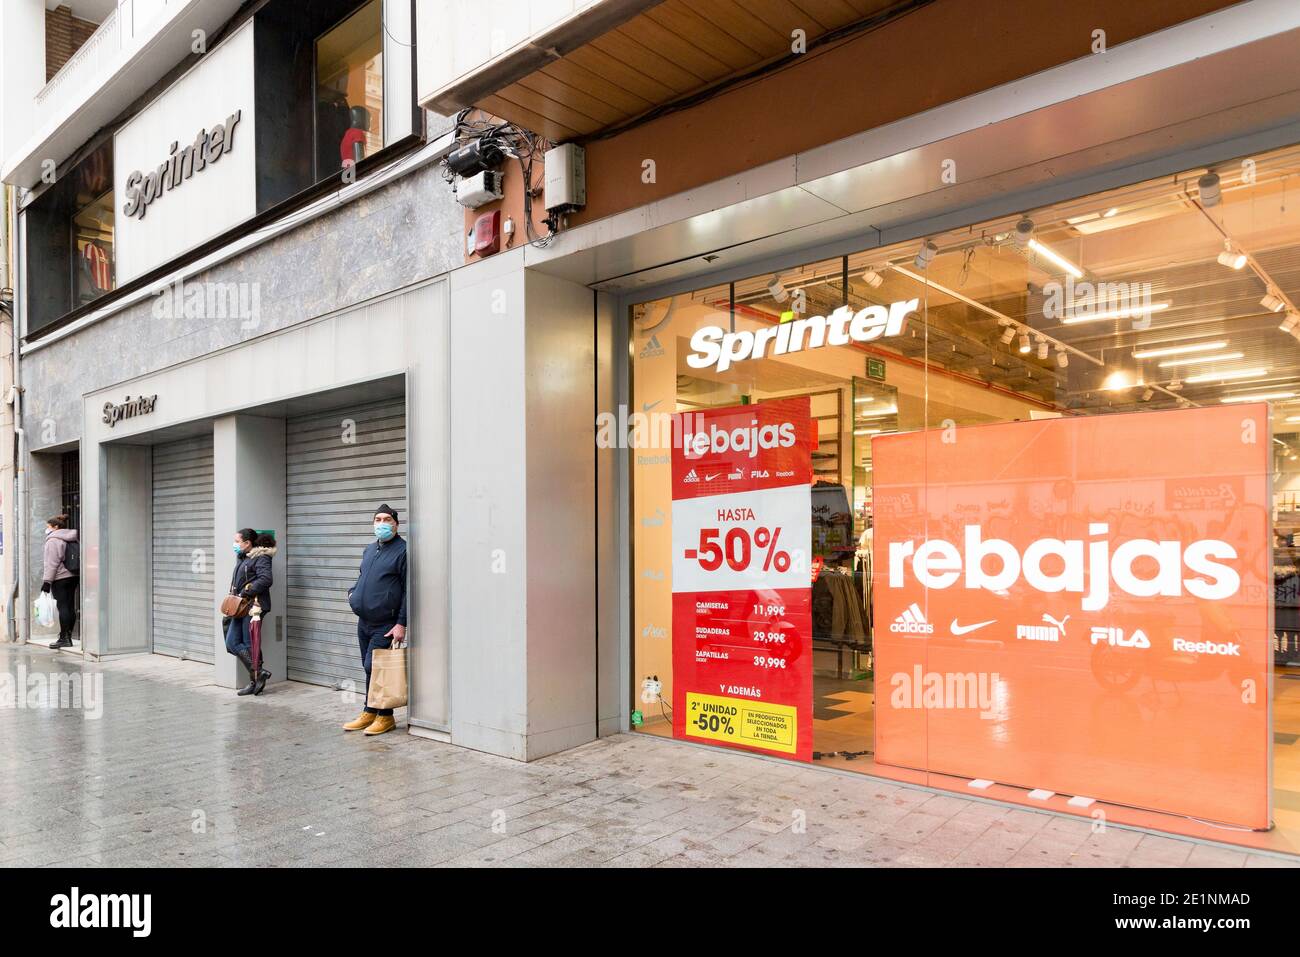 People wait front of the Sprinter store during the winter sales.In the last weeks of Christmas, the cases of Covid19 in Valencia have increased, this has caused the winter sales to